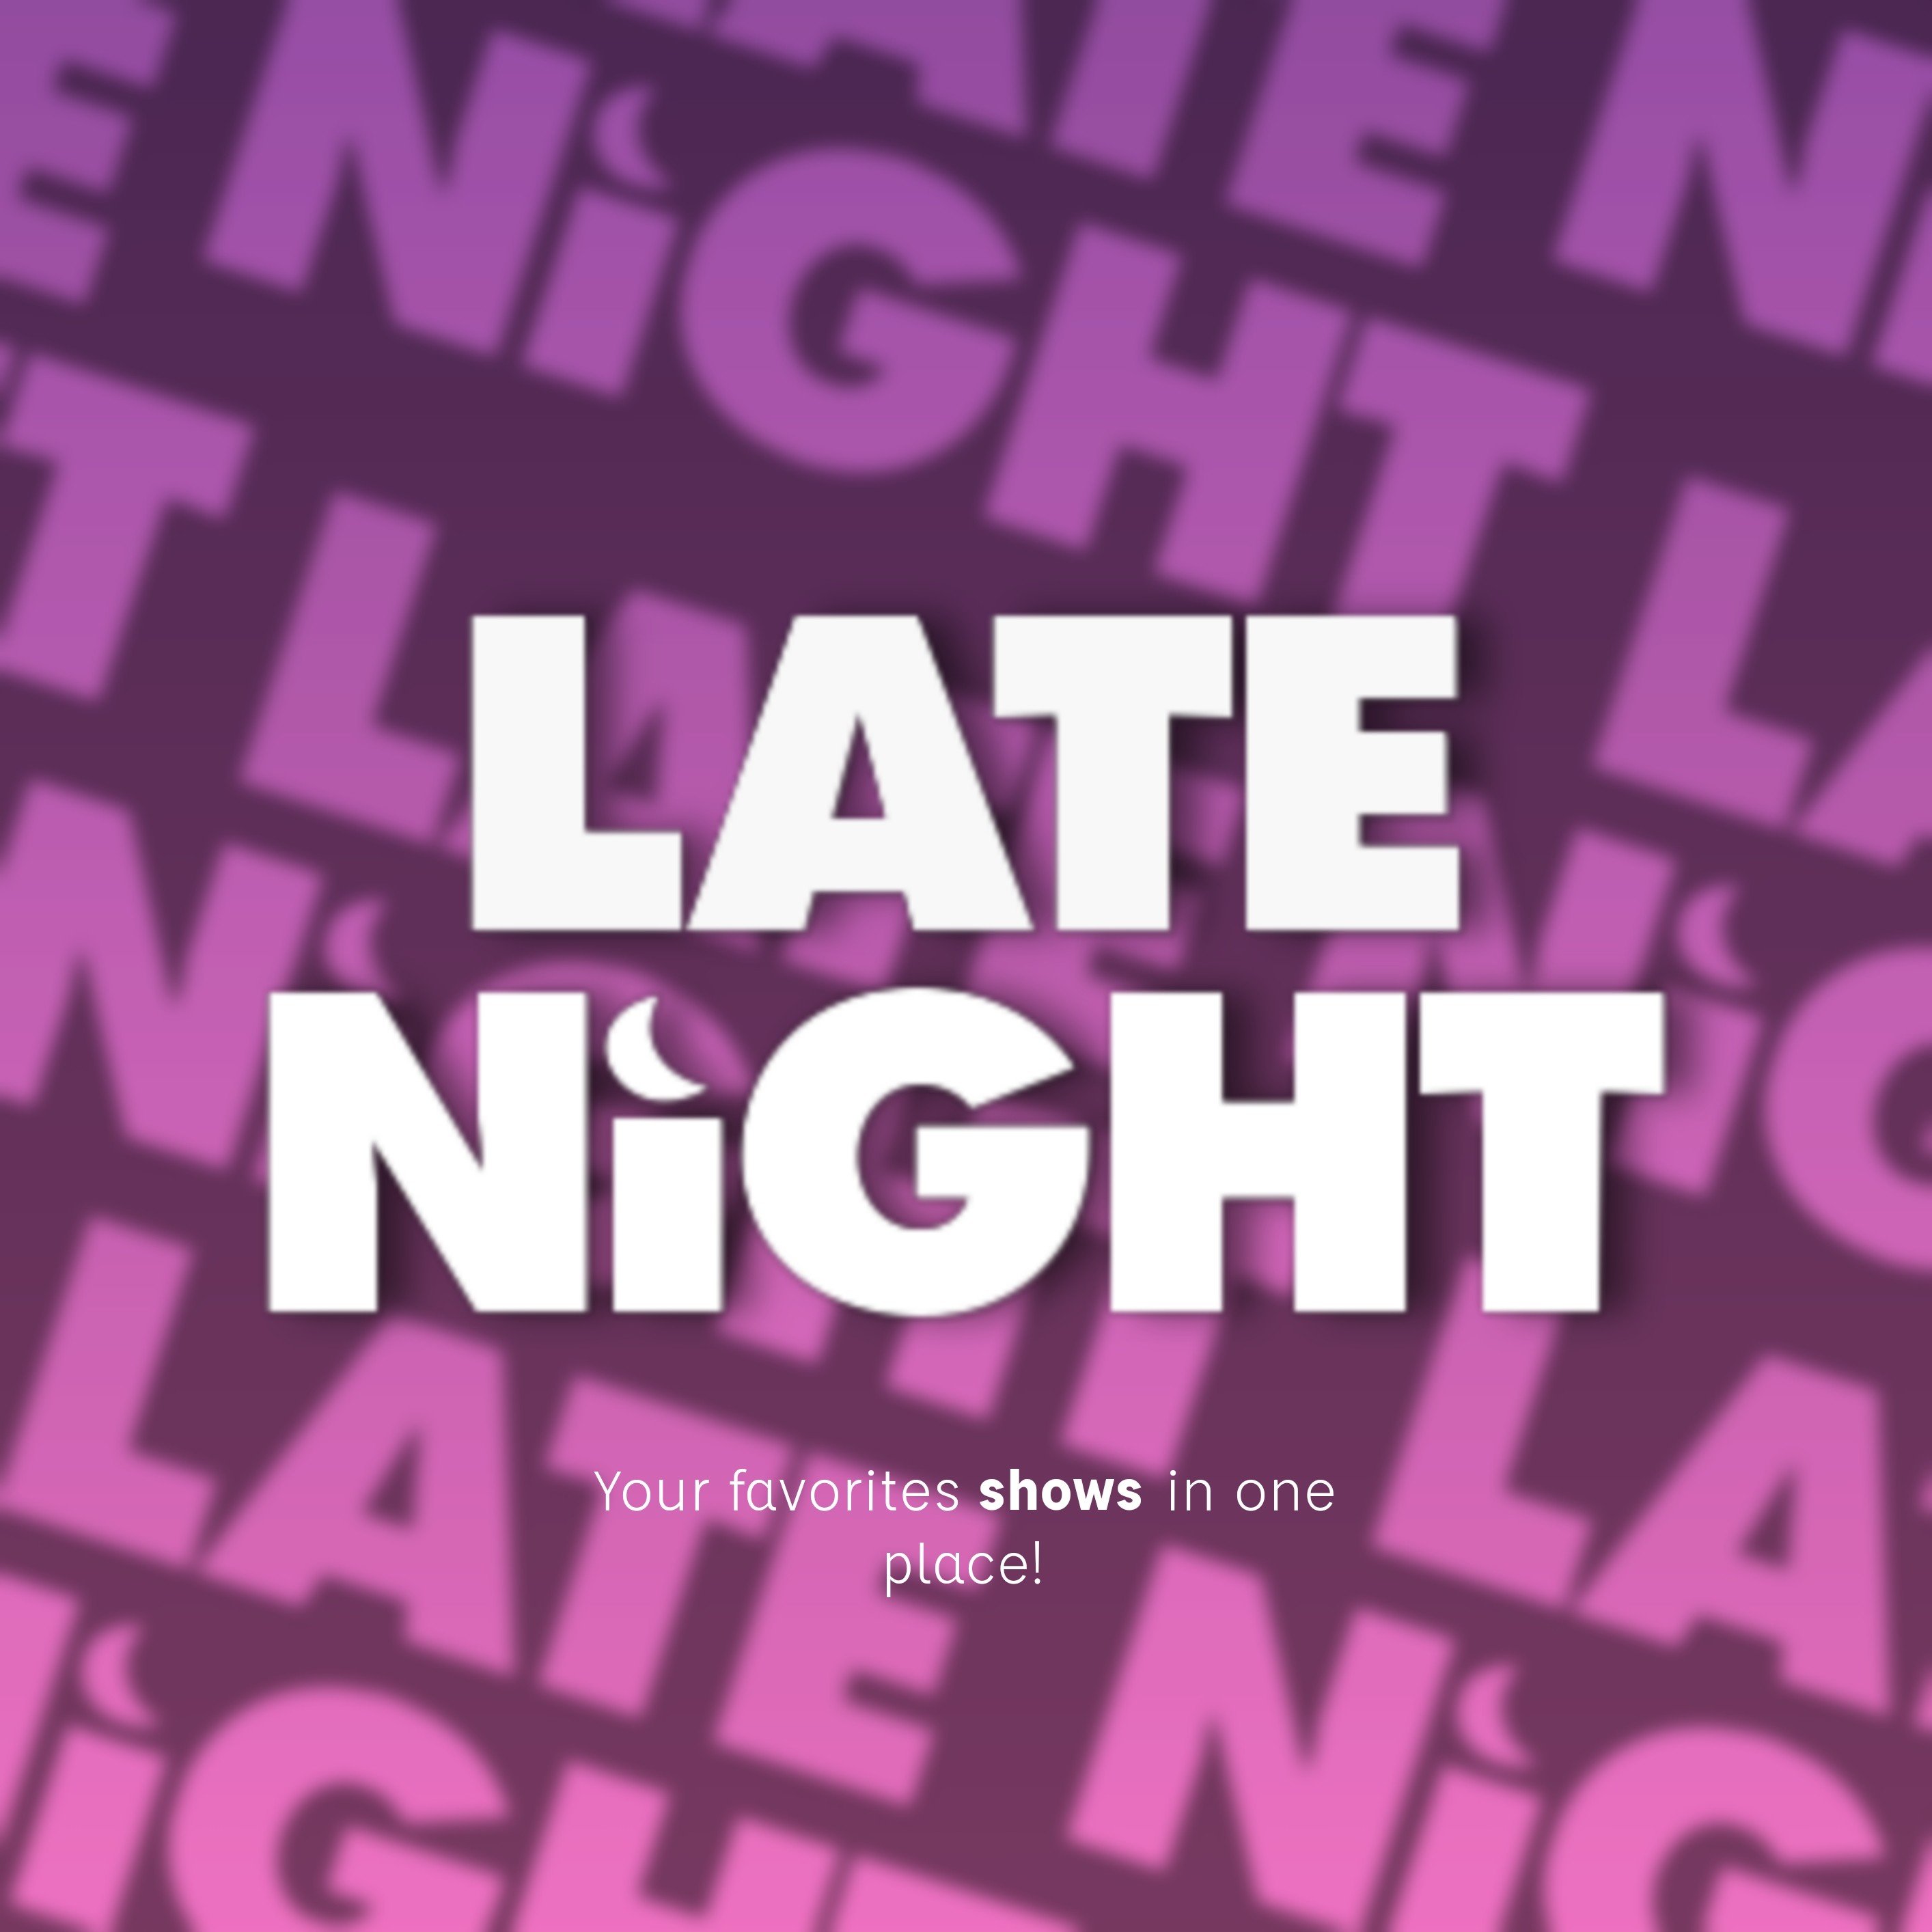 #LateNightRP 🌑 refers to the television program at the end of the night, a genre typical of the time slot between 11:30 p.m. and 3:00 a.m.